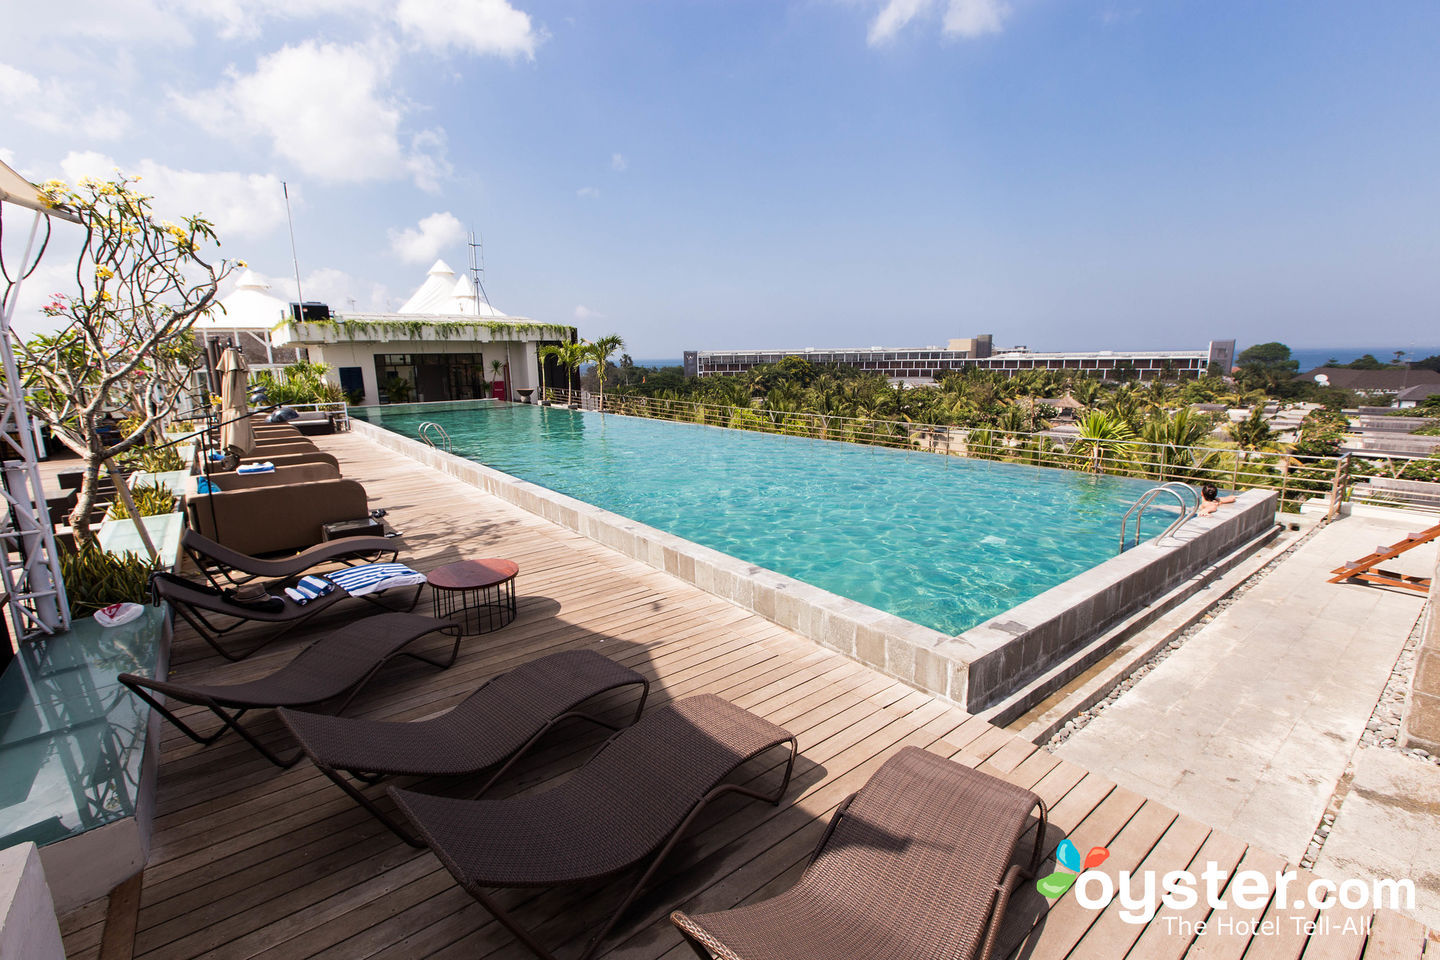 De Vins Sky Hotel Seminyak Review: What To REALLY Expect If You Stay